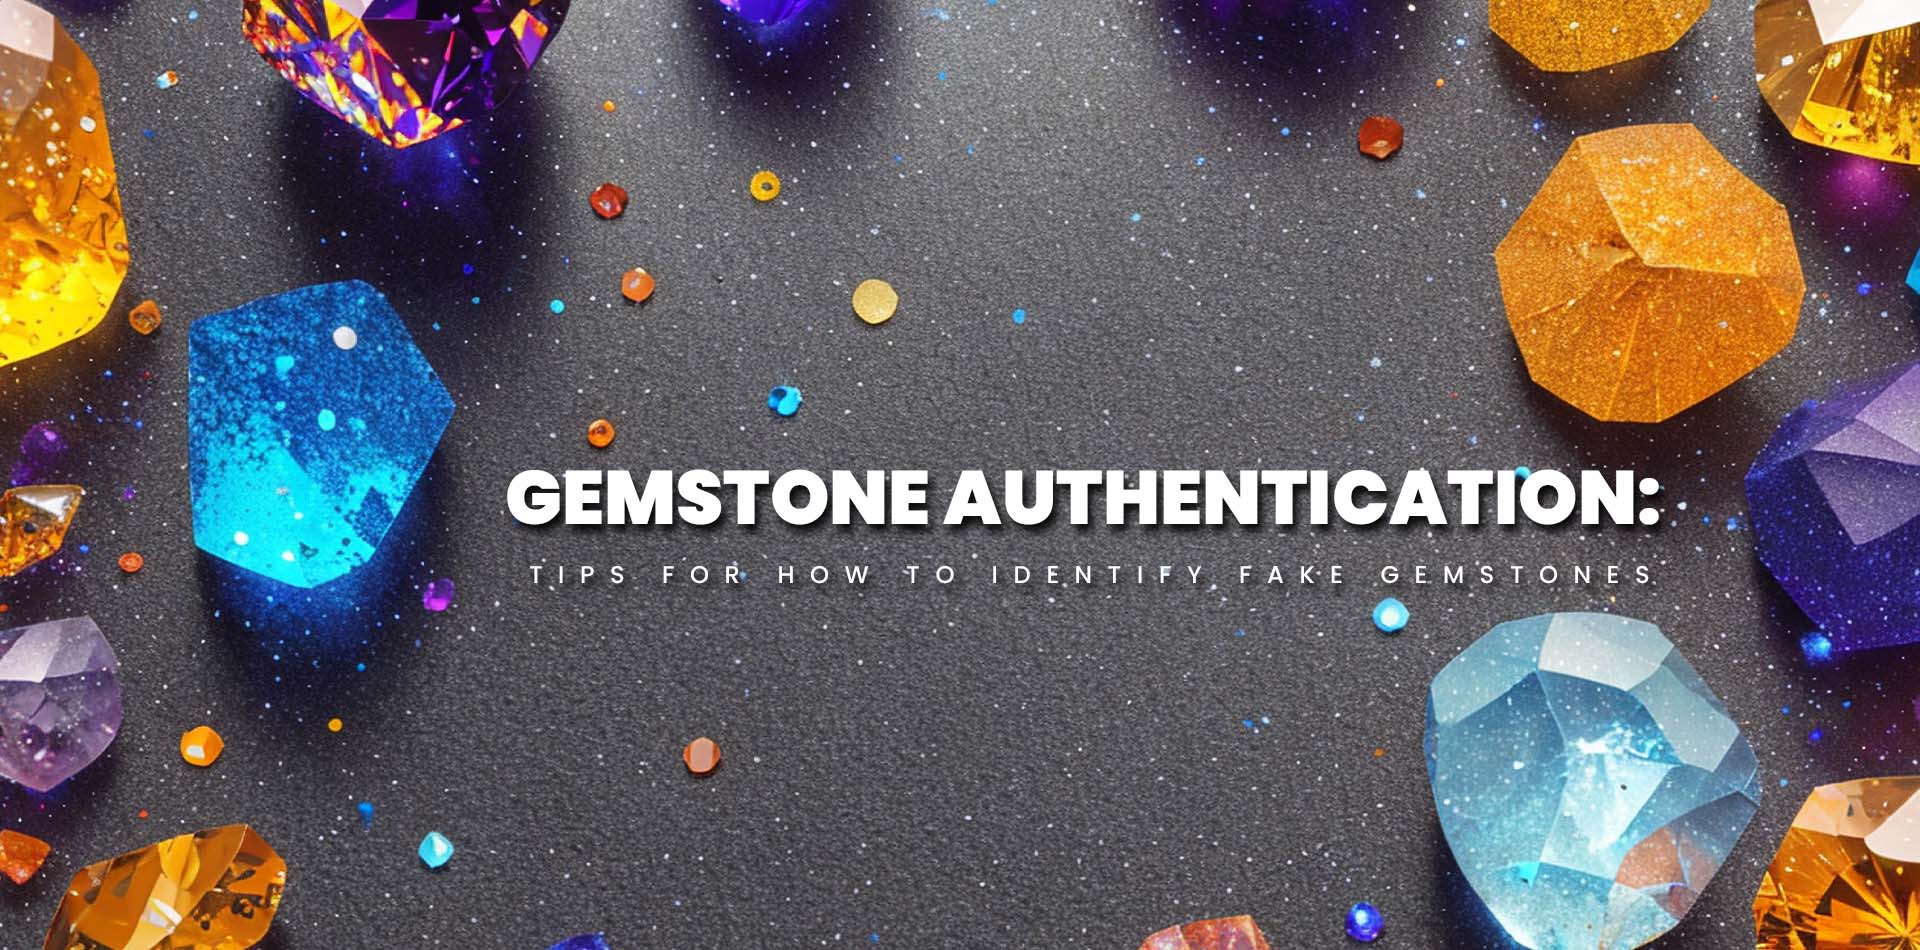 Gemstone Authentication: Tips for How to Identify Fake Gemstones